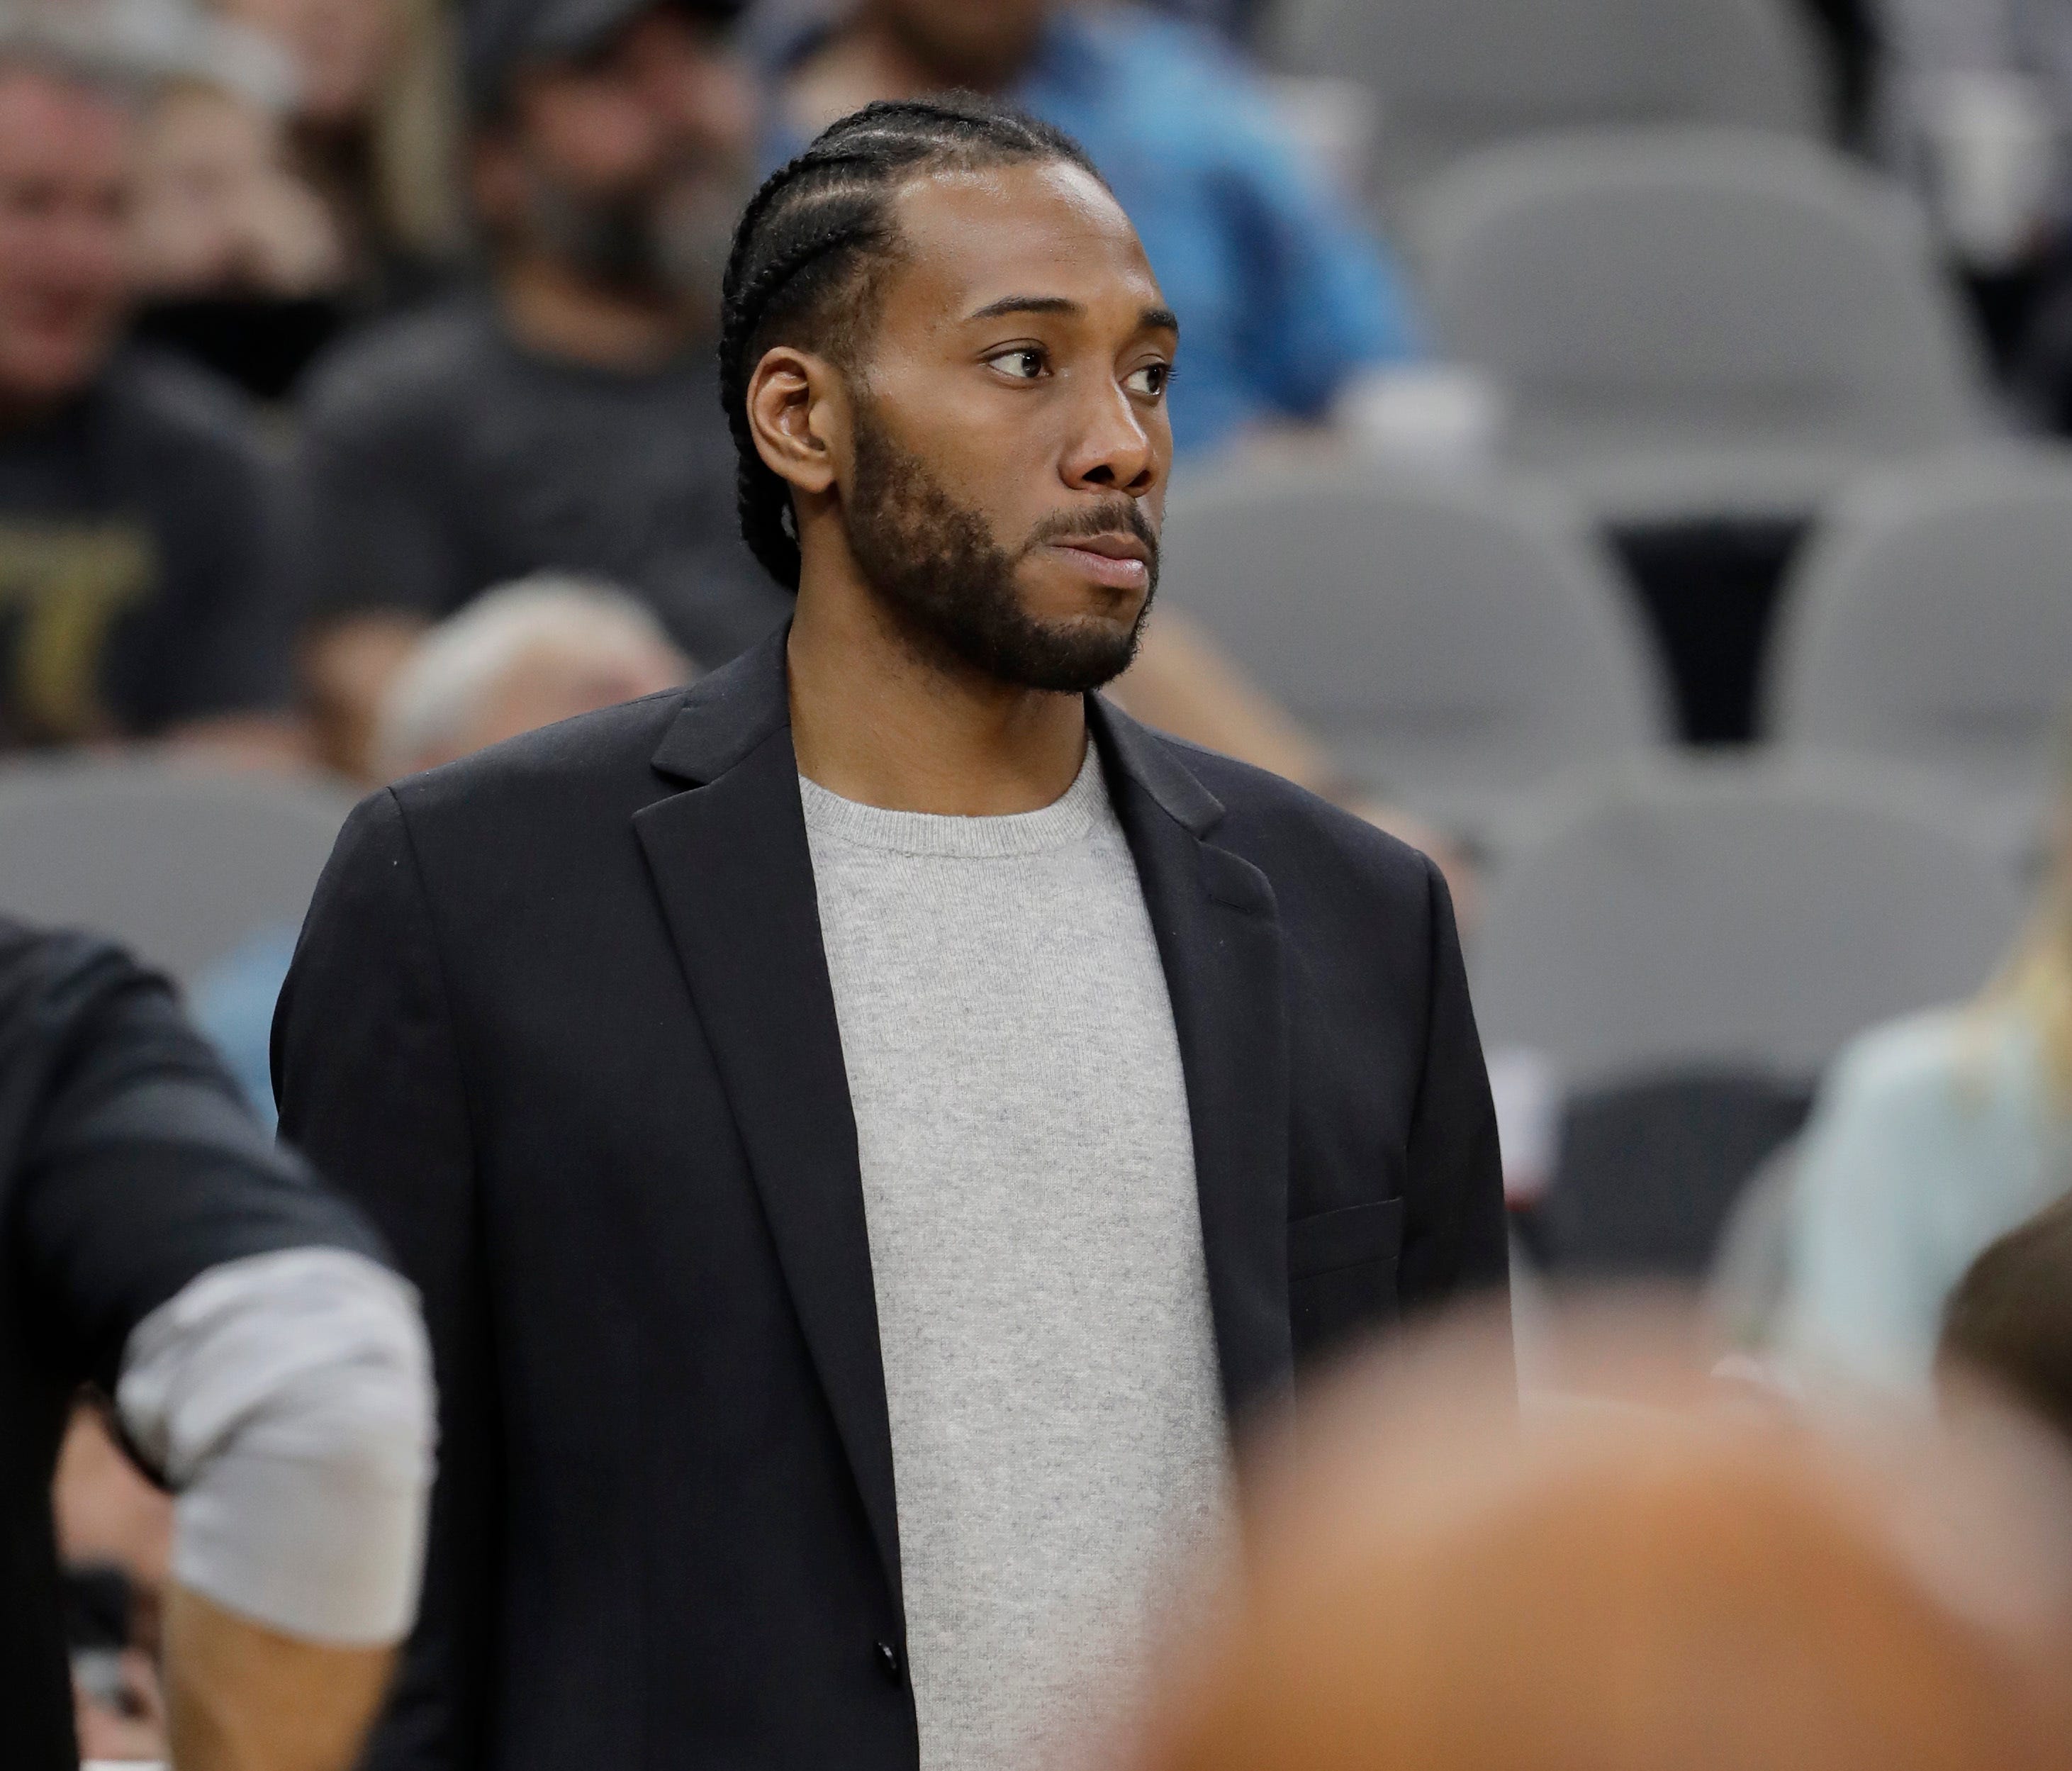 San Antonio Spurs forward Kawhi Leonard, waiting to return from injury, wears street cloths as he watches from the bench.